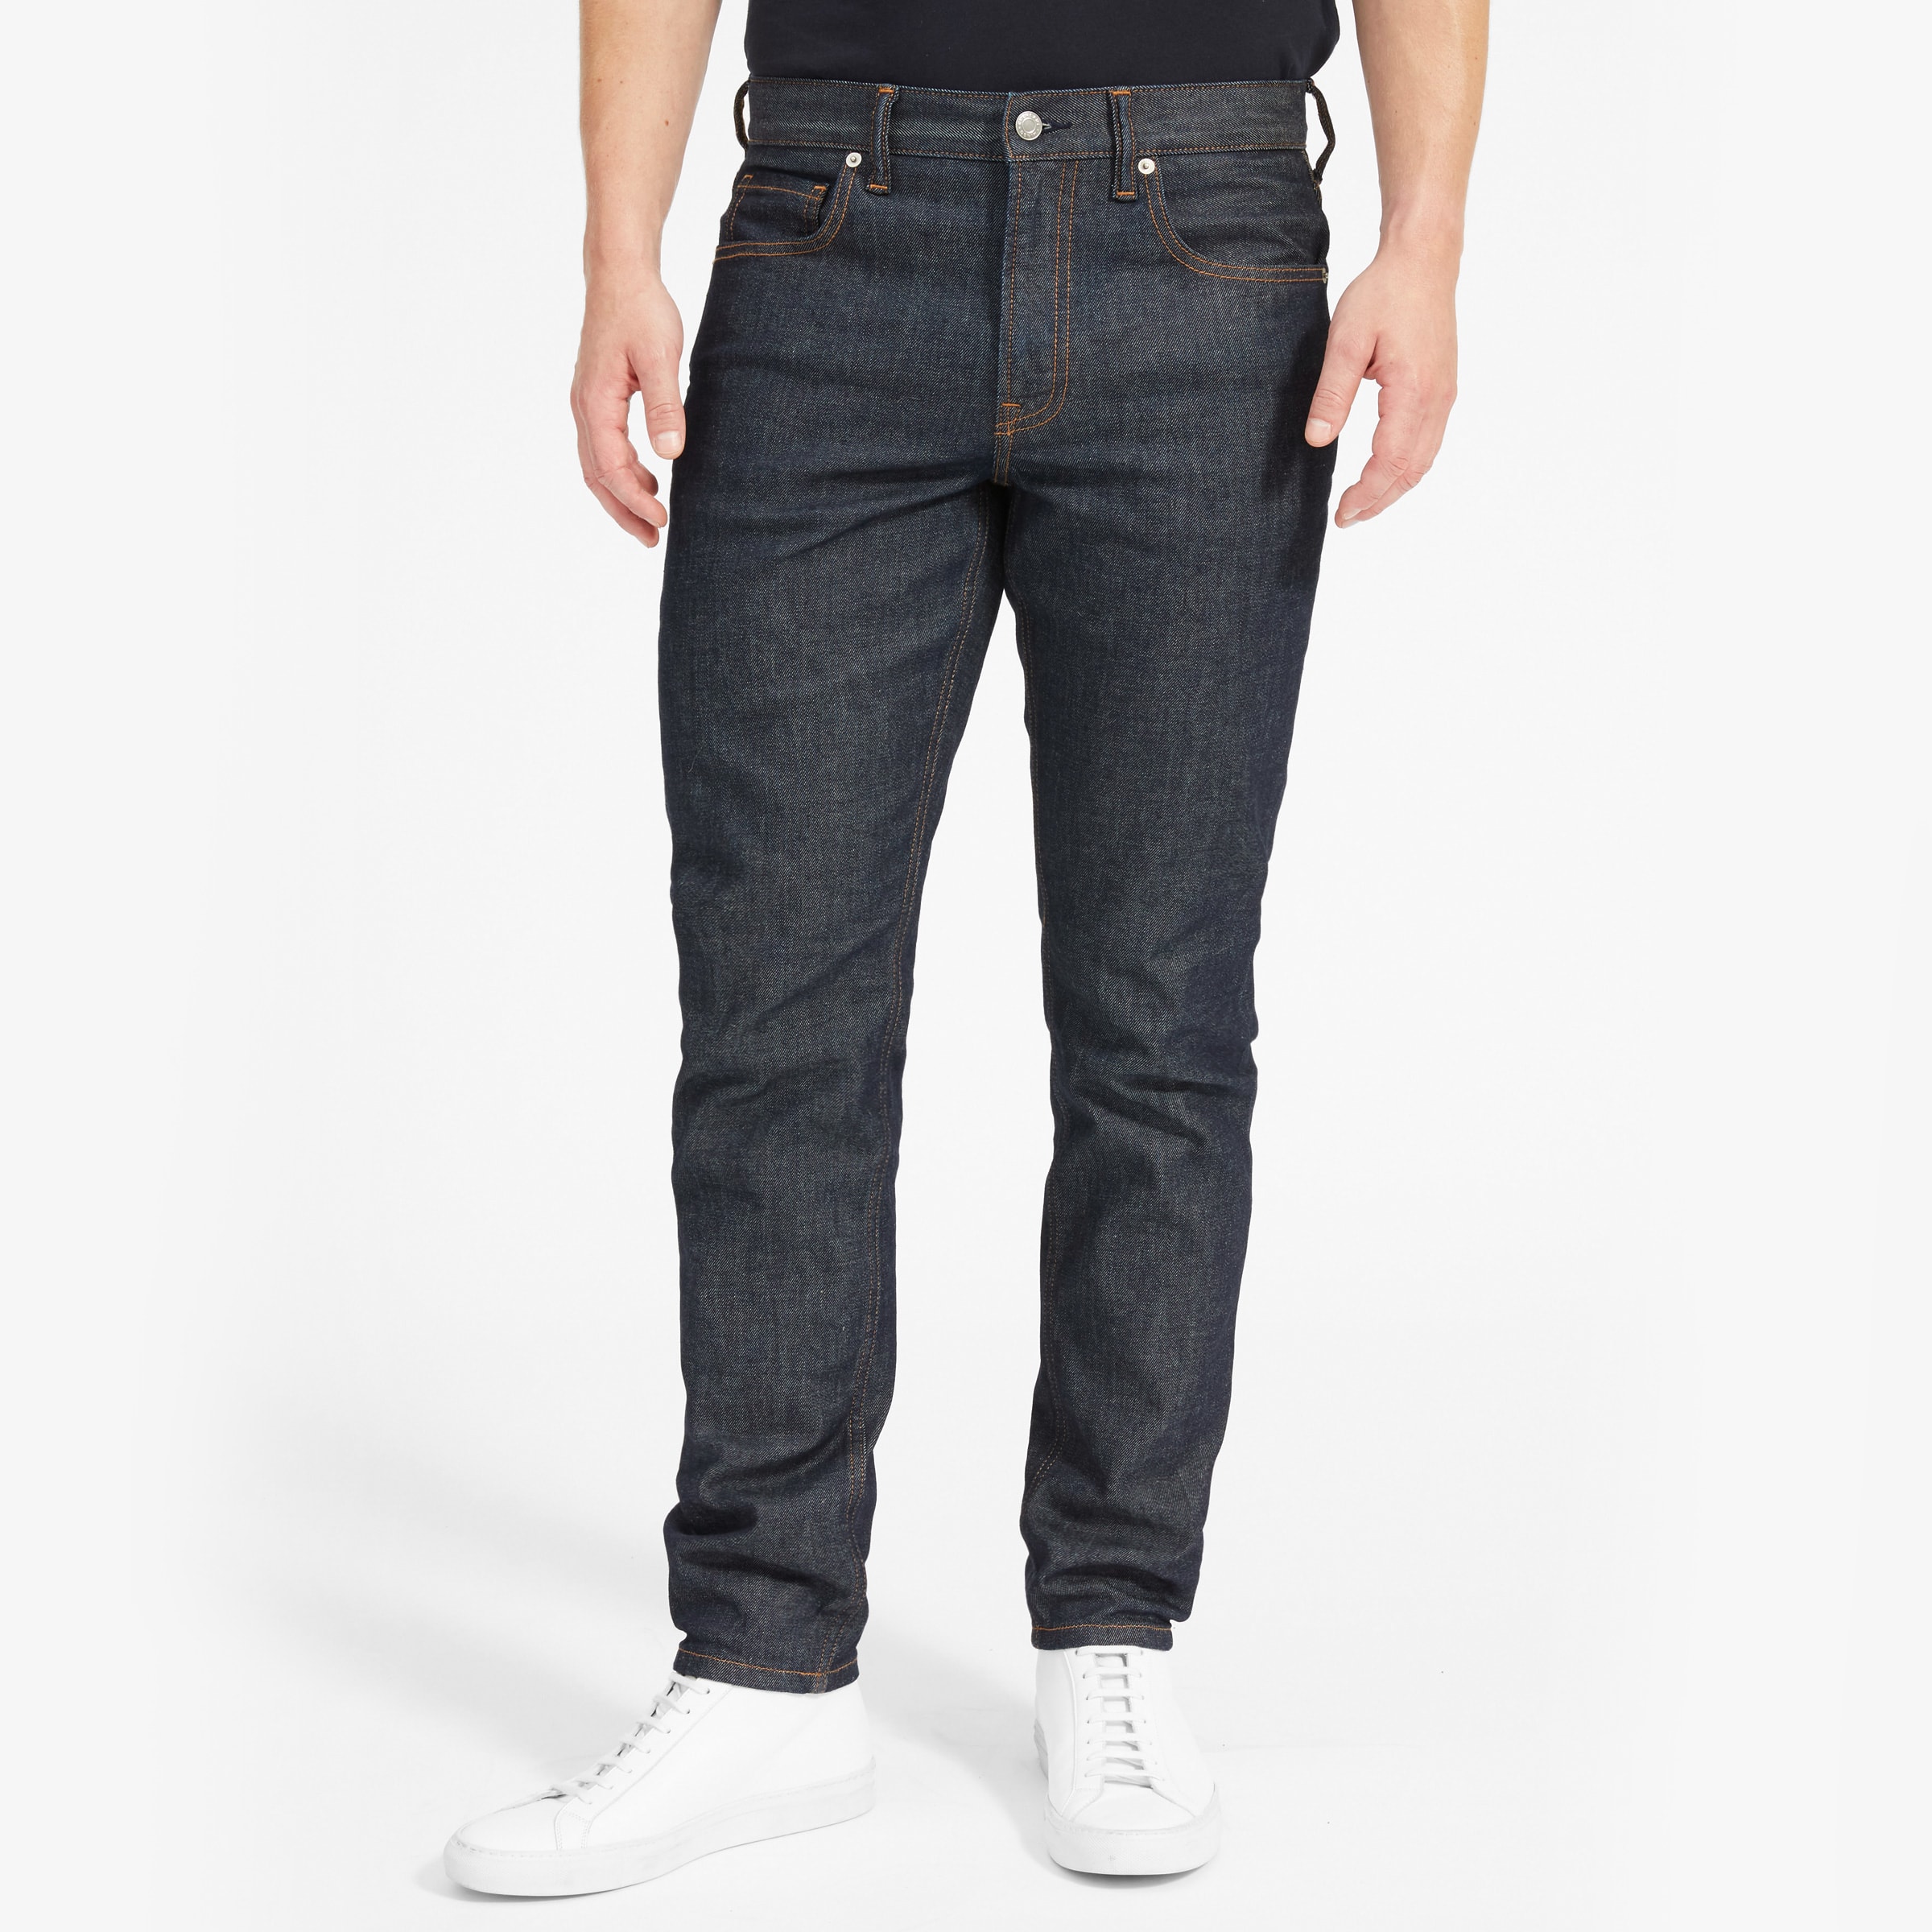 The Athletic Fit Jean